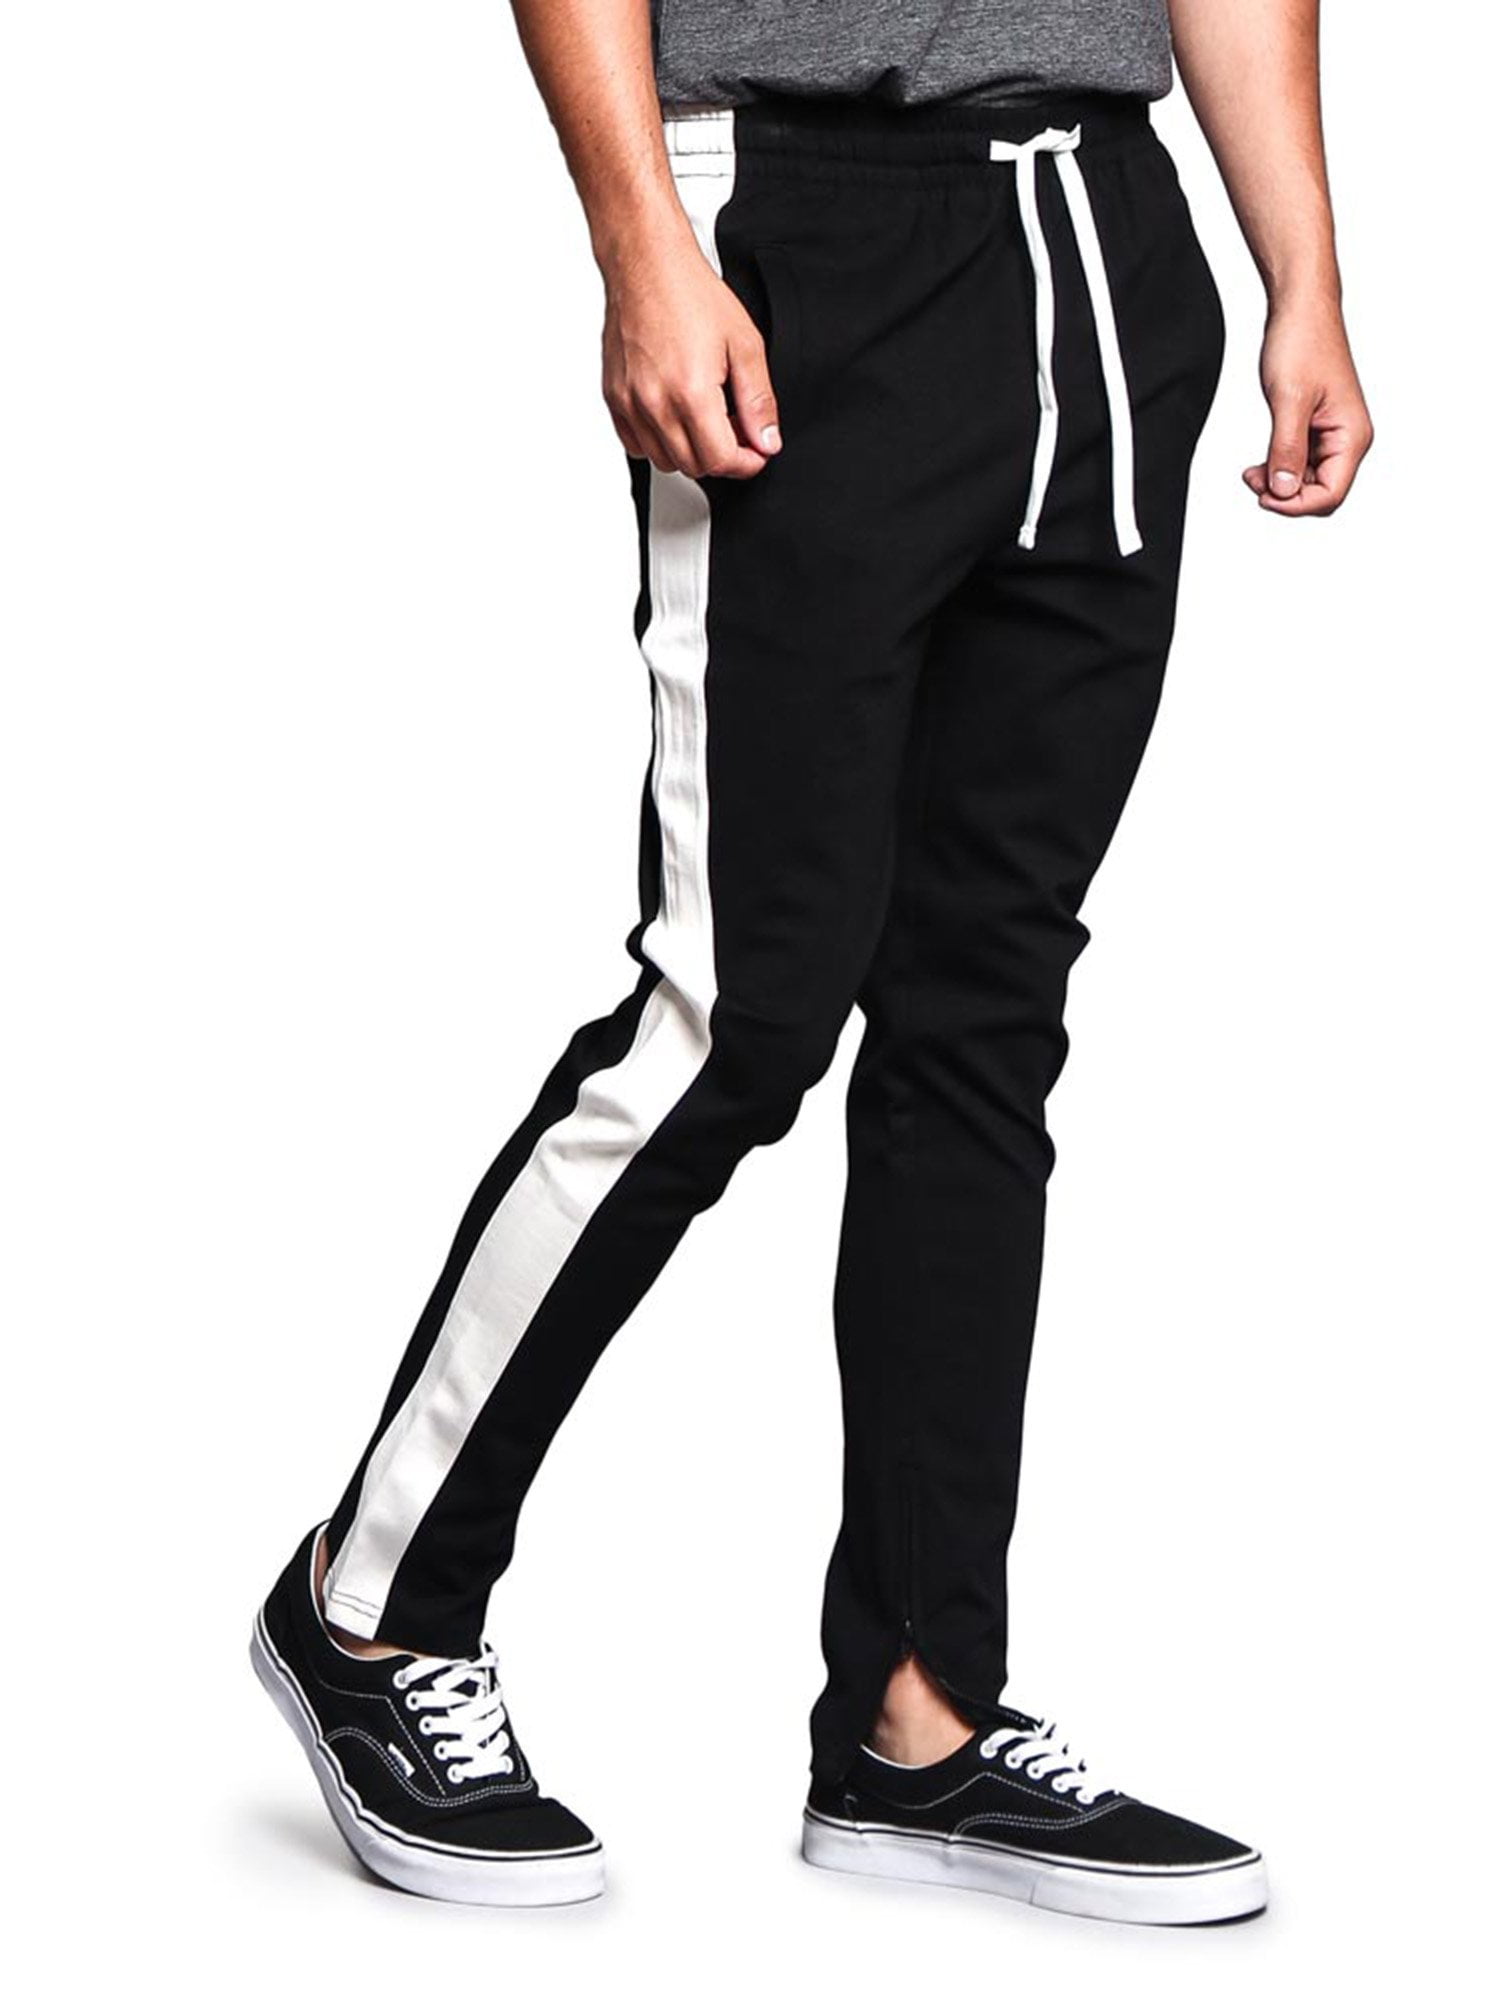 G-Style USA Men's Hip Hop Slim Fit Track Pants - Athletic Jogger with Side  Stripe - Black/Off-White - 2X-Large 